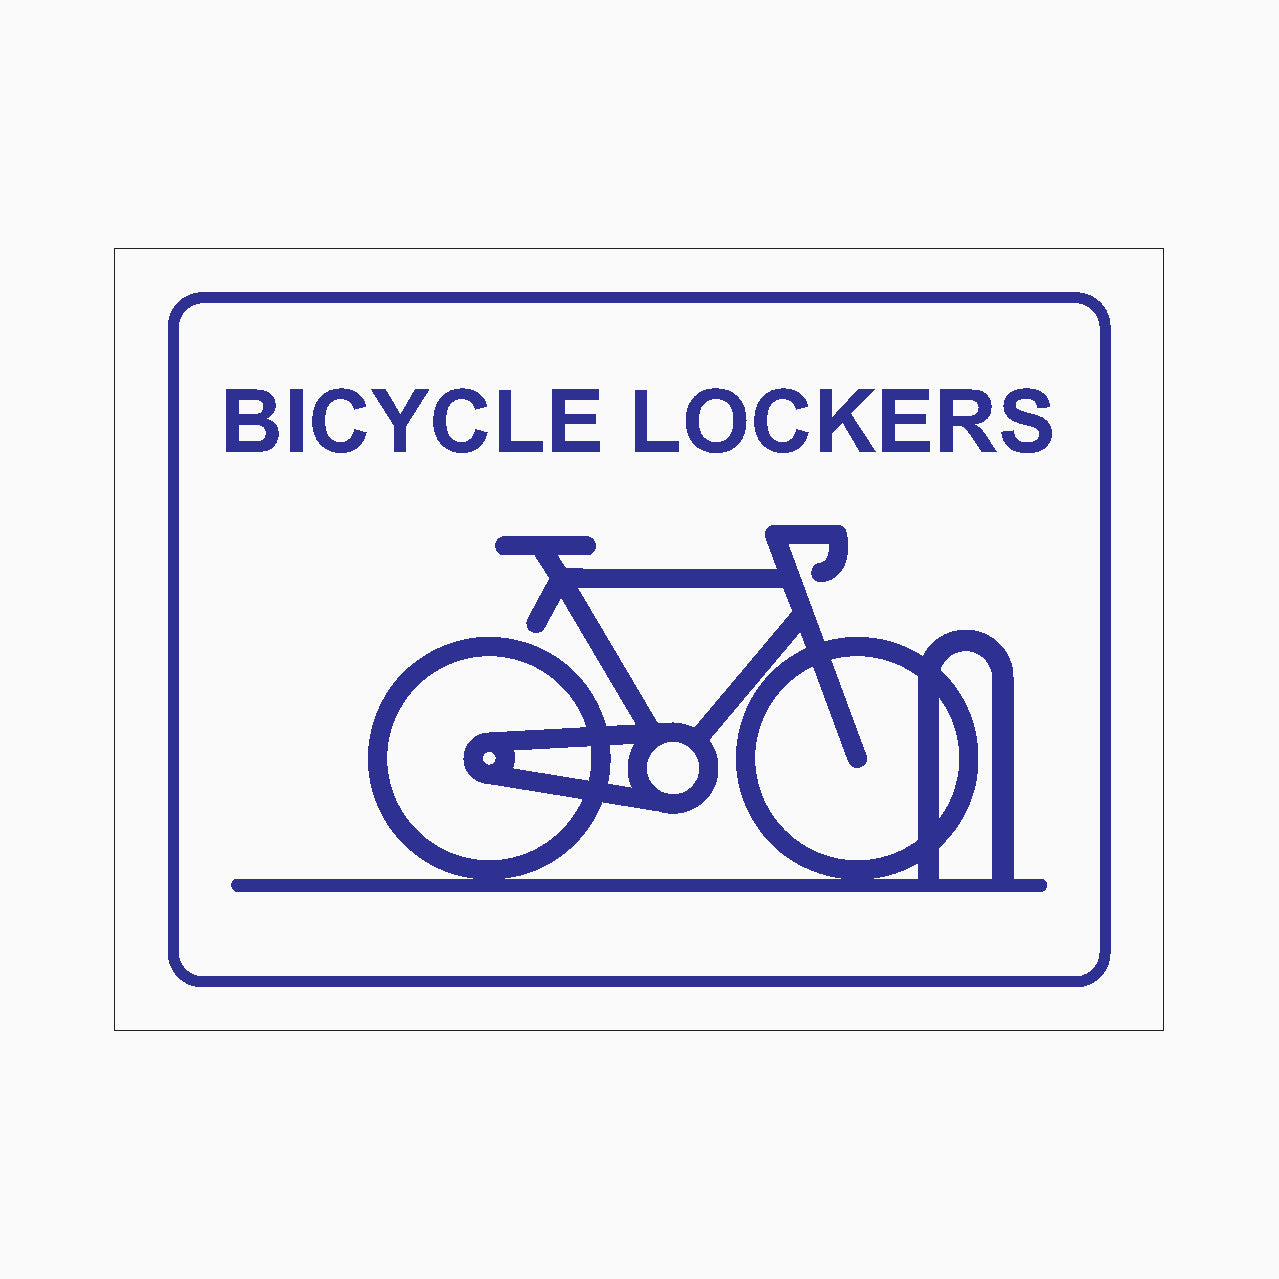 BICYCLE LOCKERS SIGN - parking sign